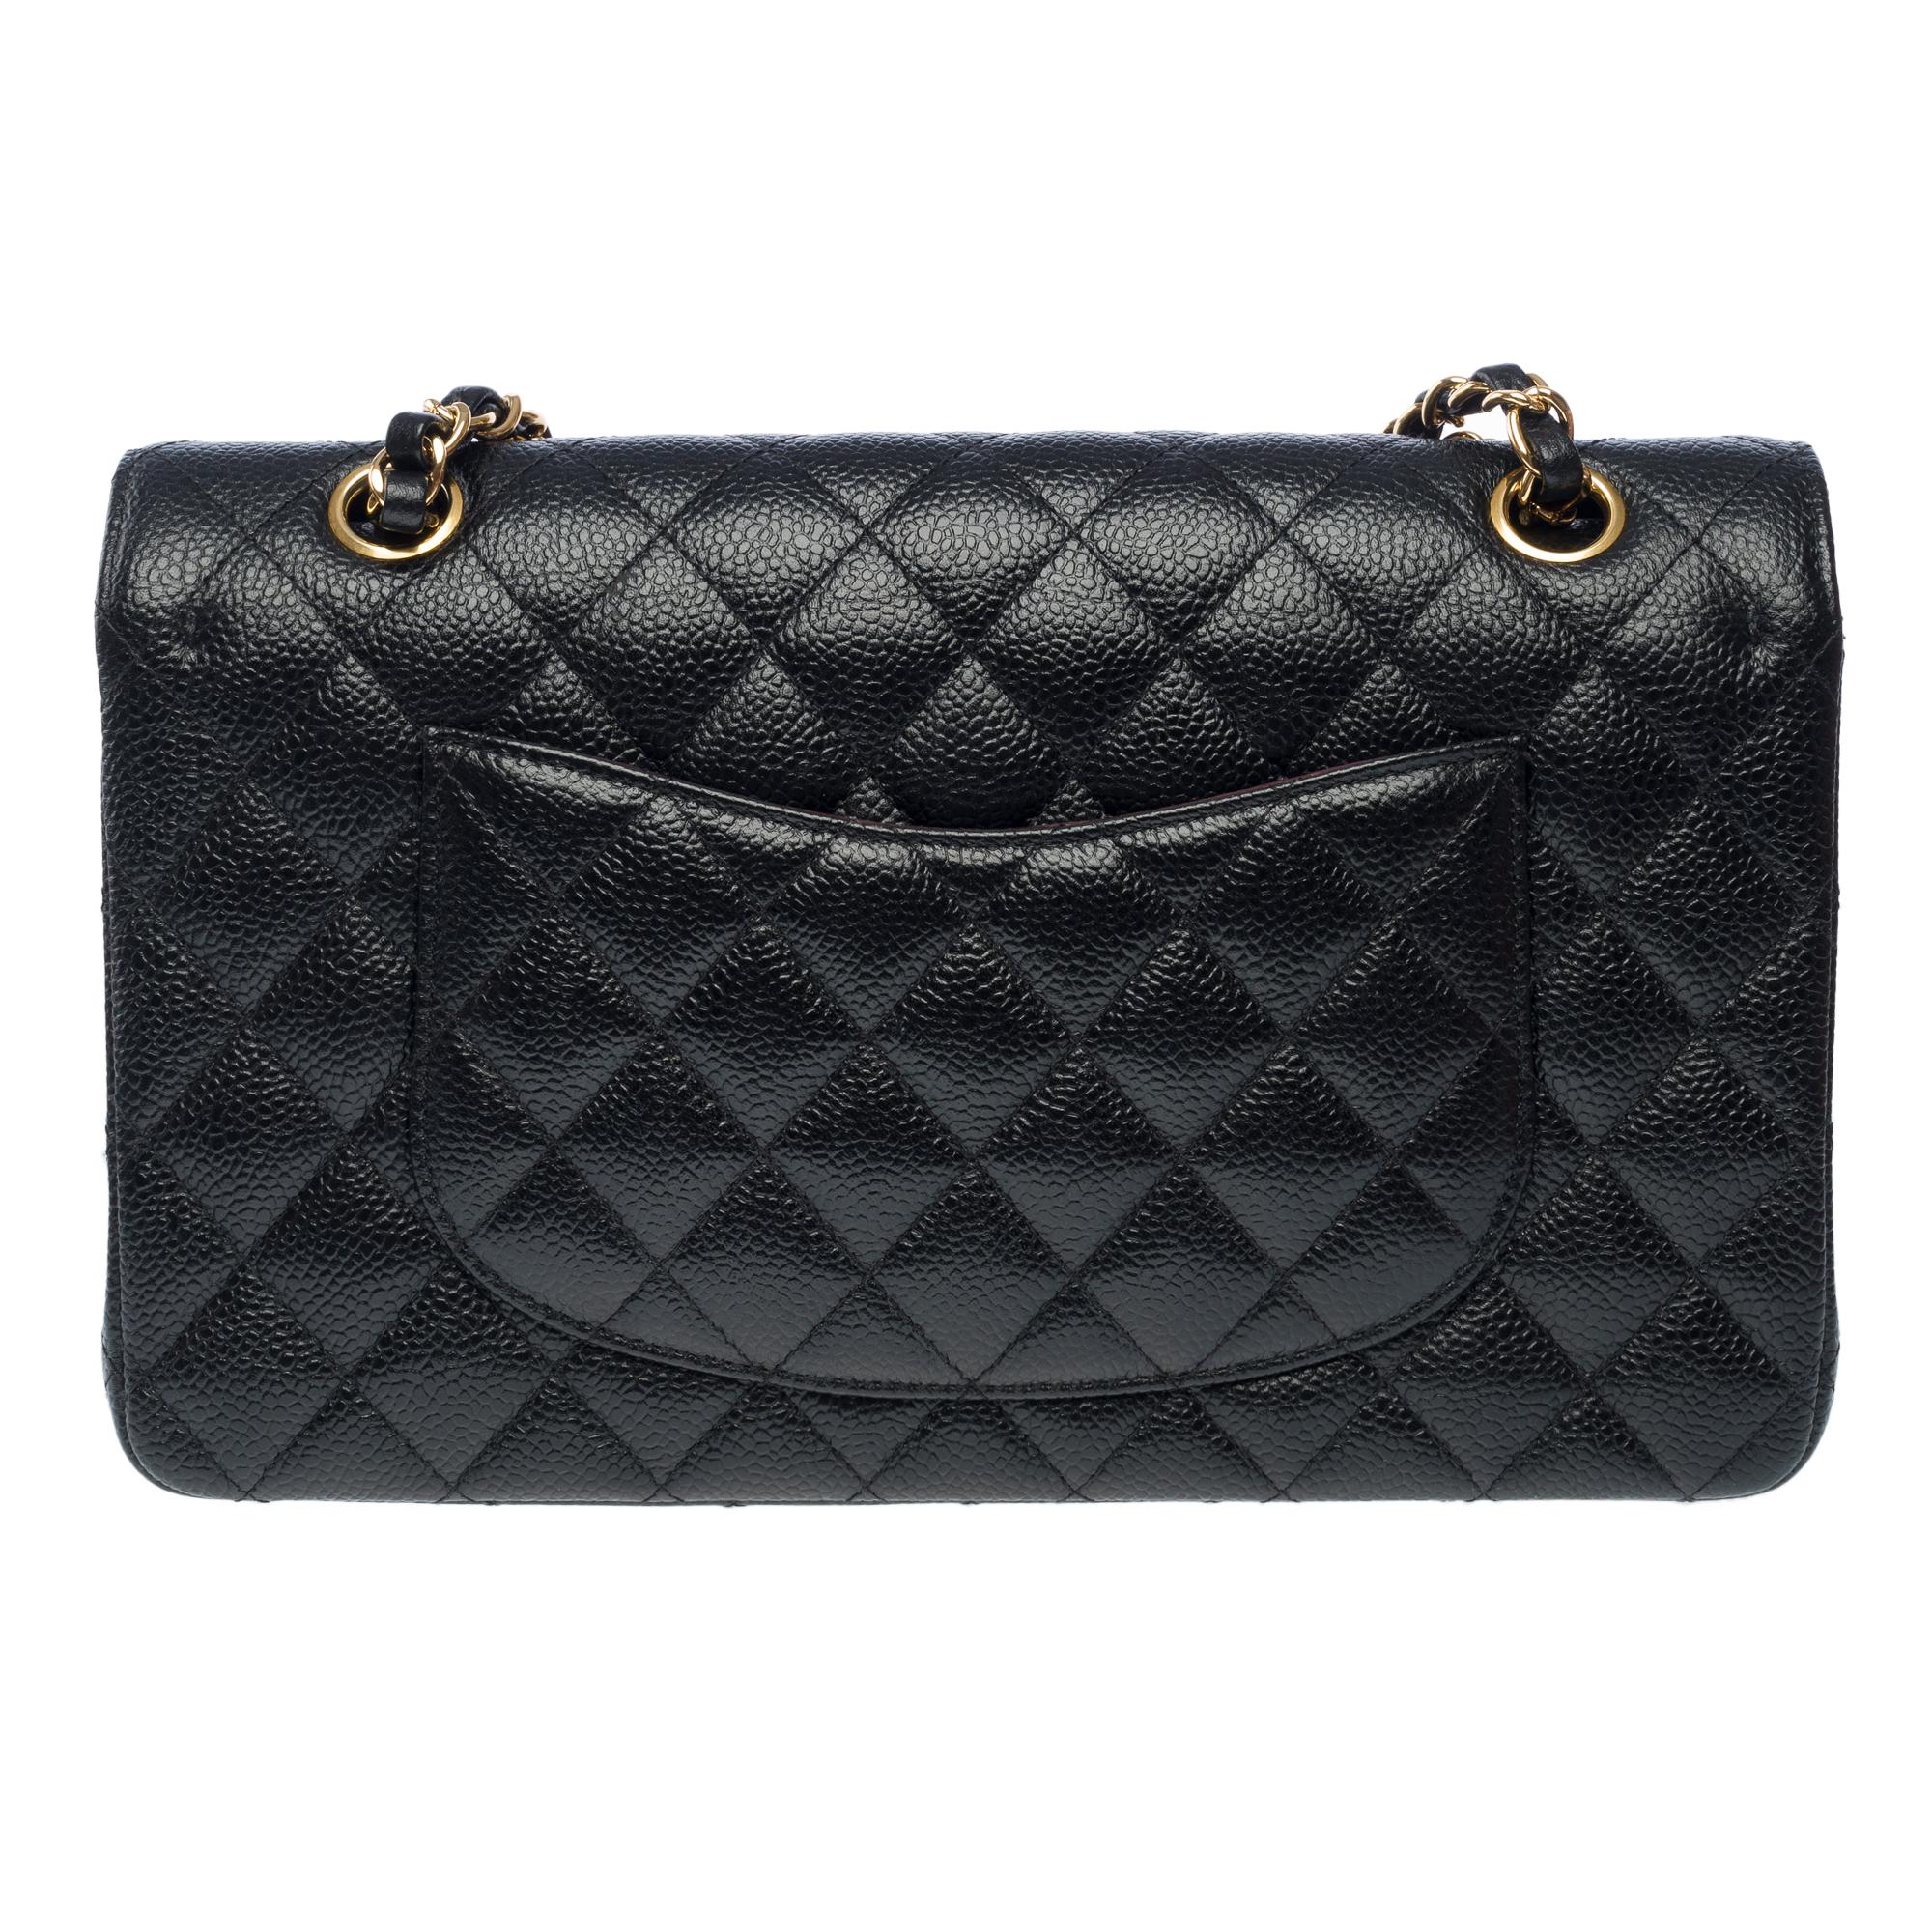 Women's Chanel Timeless double flap shoulder bag in Black Quilted Caviar leather, GHW